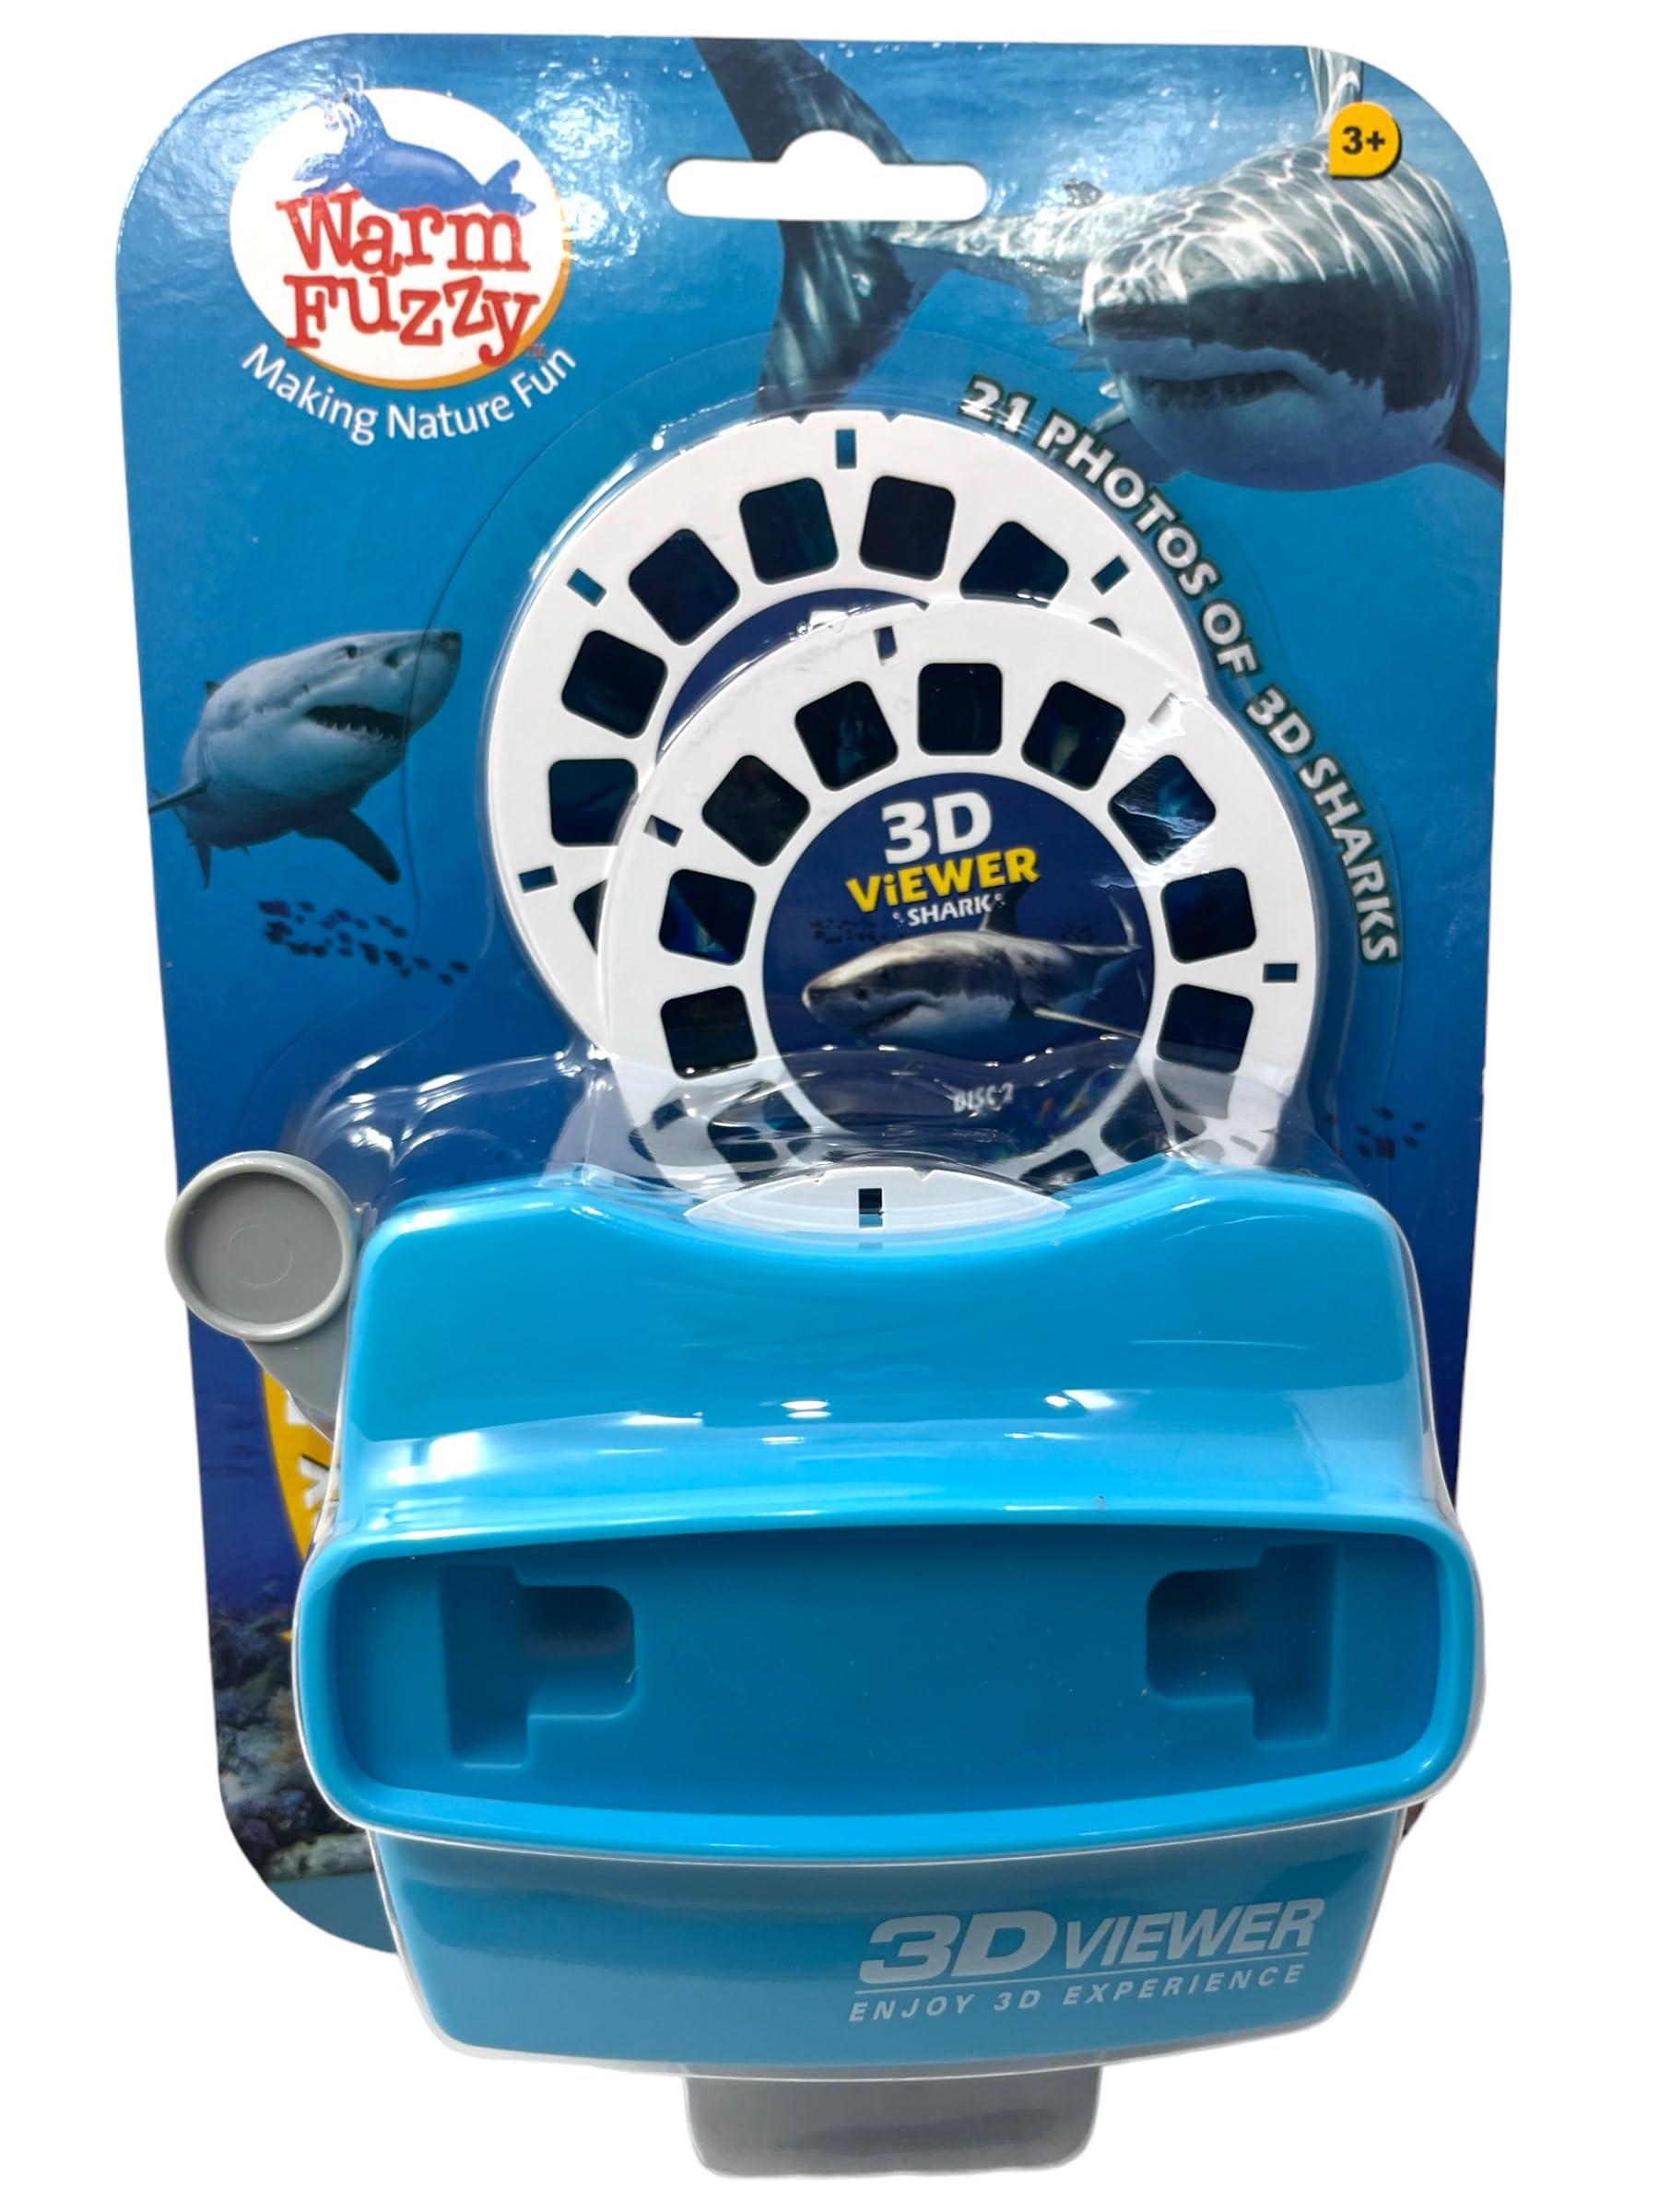 warm fuzzy toys 3d viewfinder (shark) - viewfinder for kids & adults, classic toys, slide viewer, 3d reel viewer, retro toys,